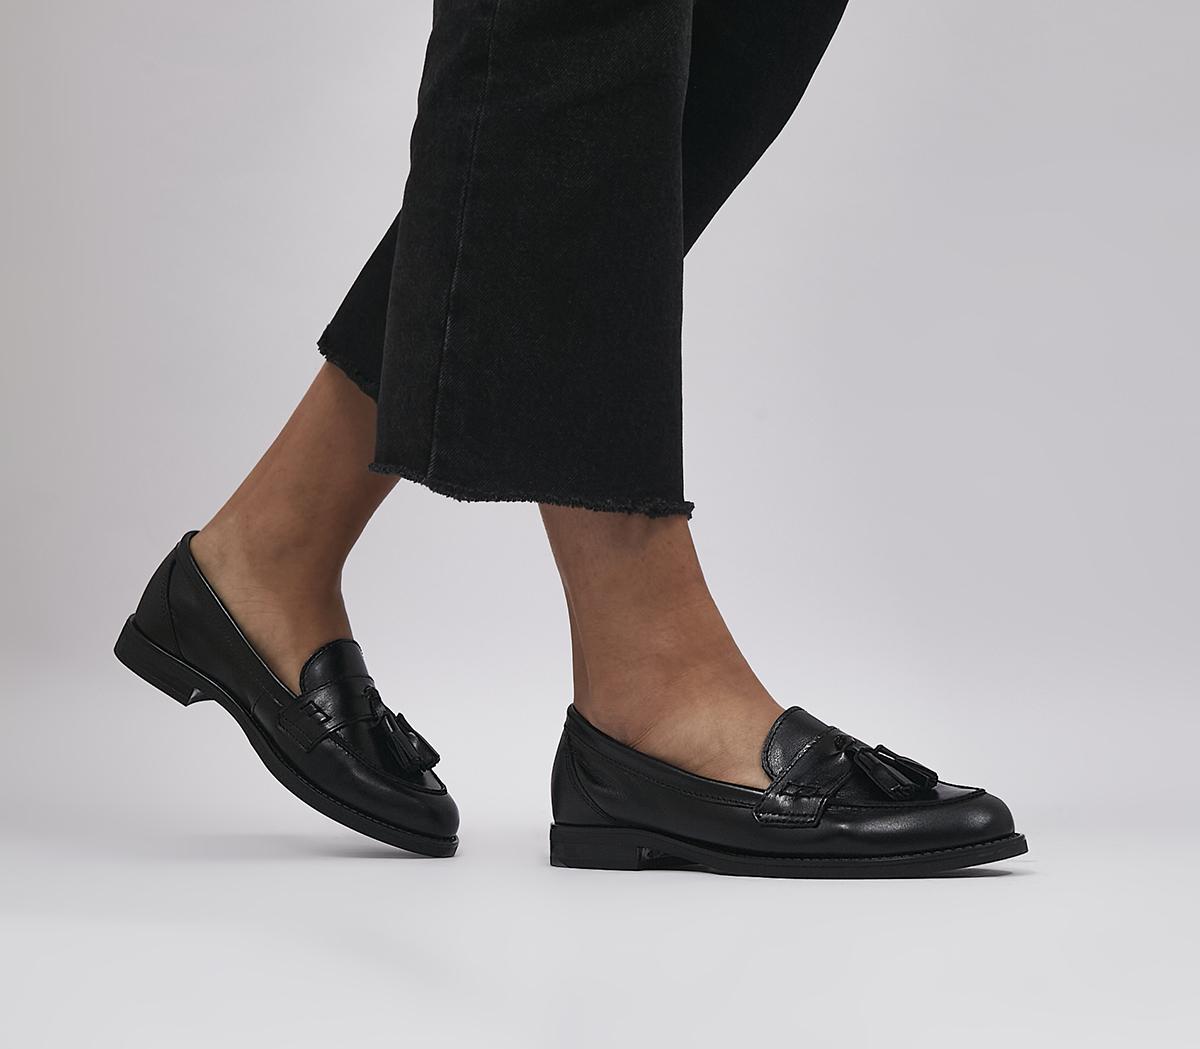 OFFICE Florin Tassel Loafers Black Leather - Flat Shoes for Women